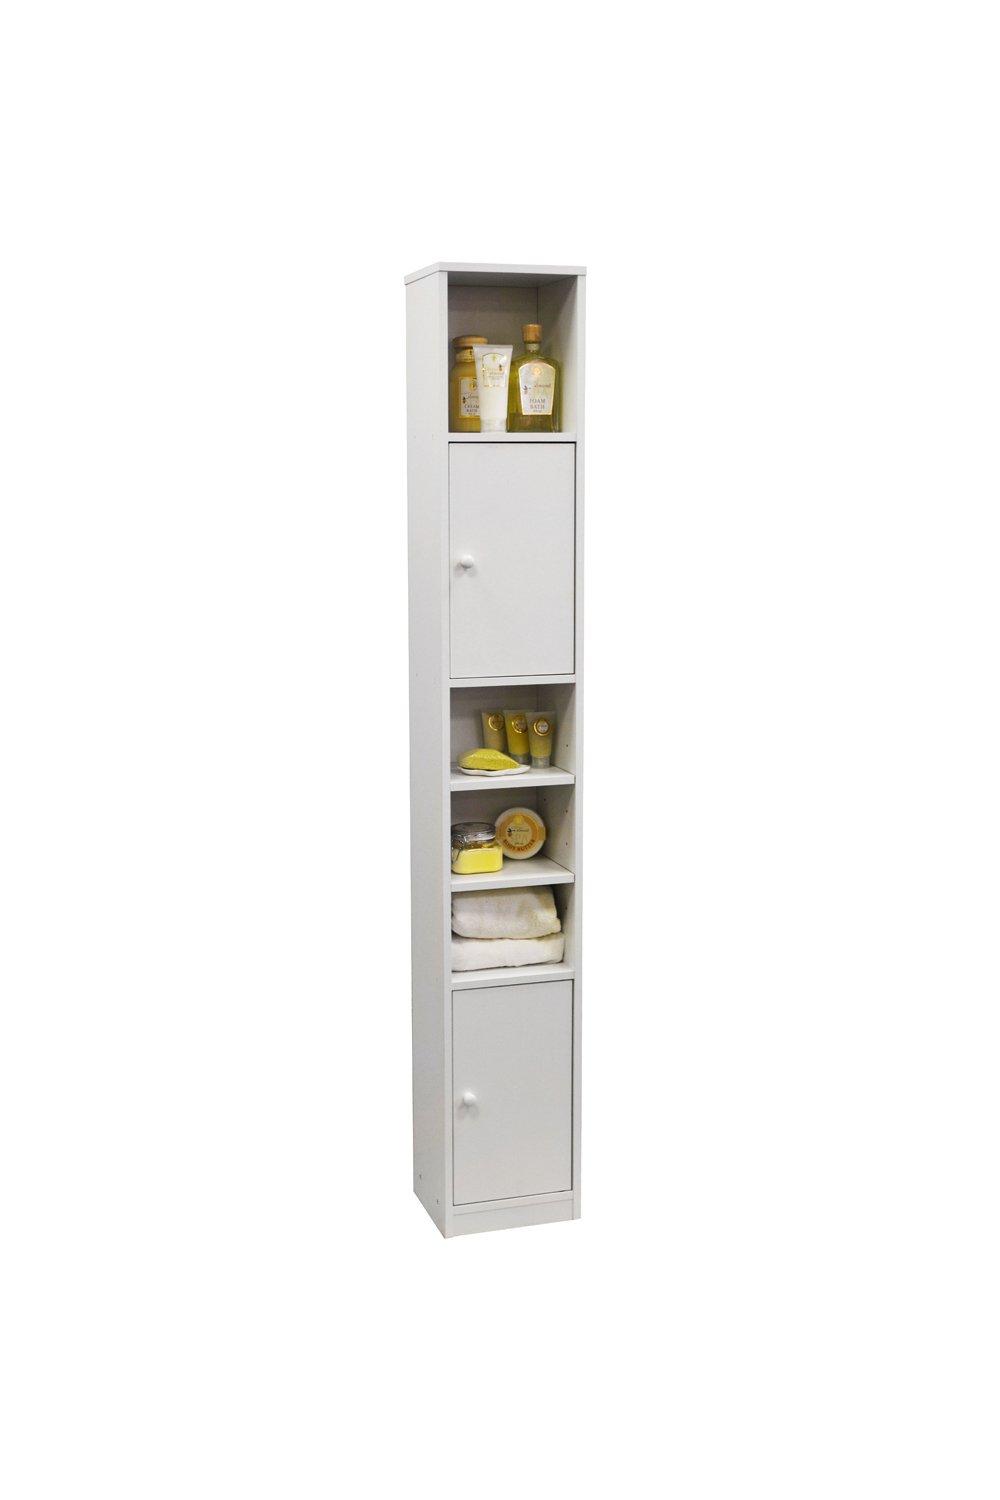 'Jamerson'  Large Tall Tower Storage Cupboard With Shelves  White